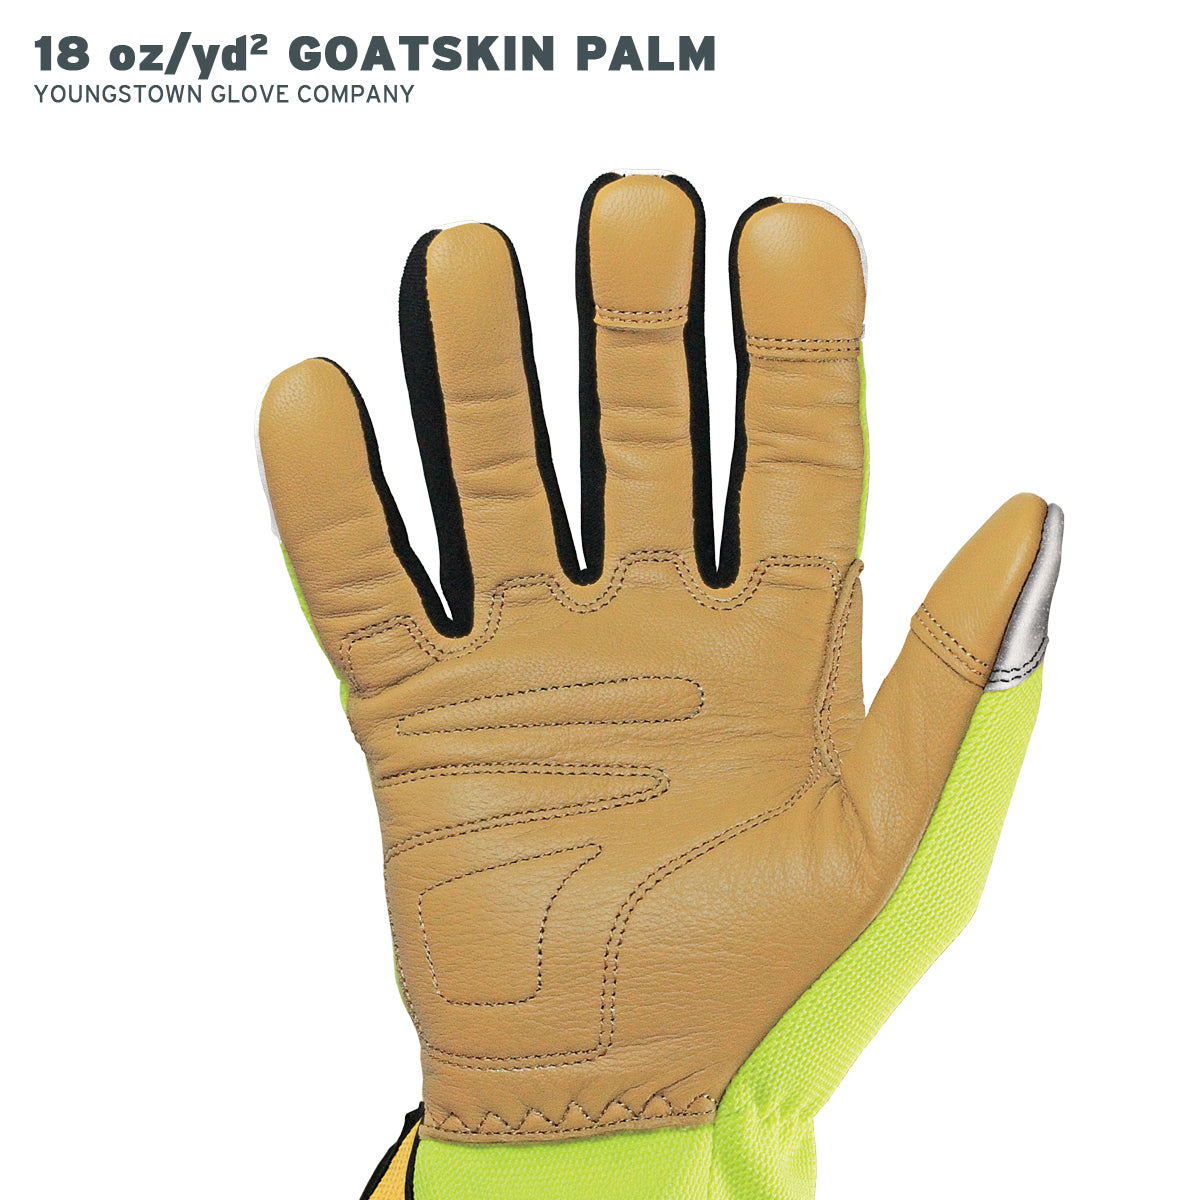 These Cut-Resistant Gloves Are Gonna Make Sure You Don't Cut Your Fingers  Off